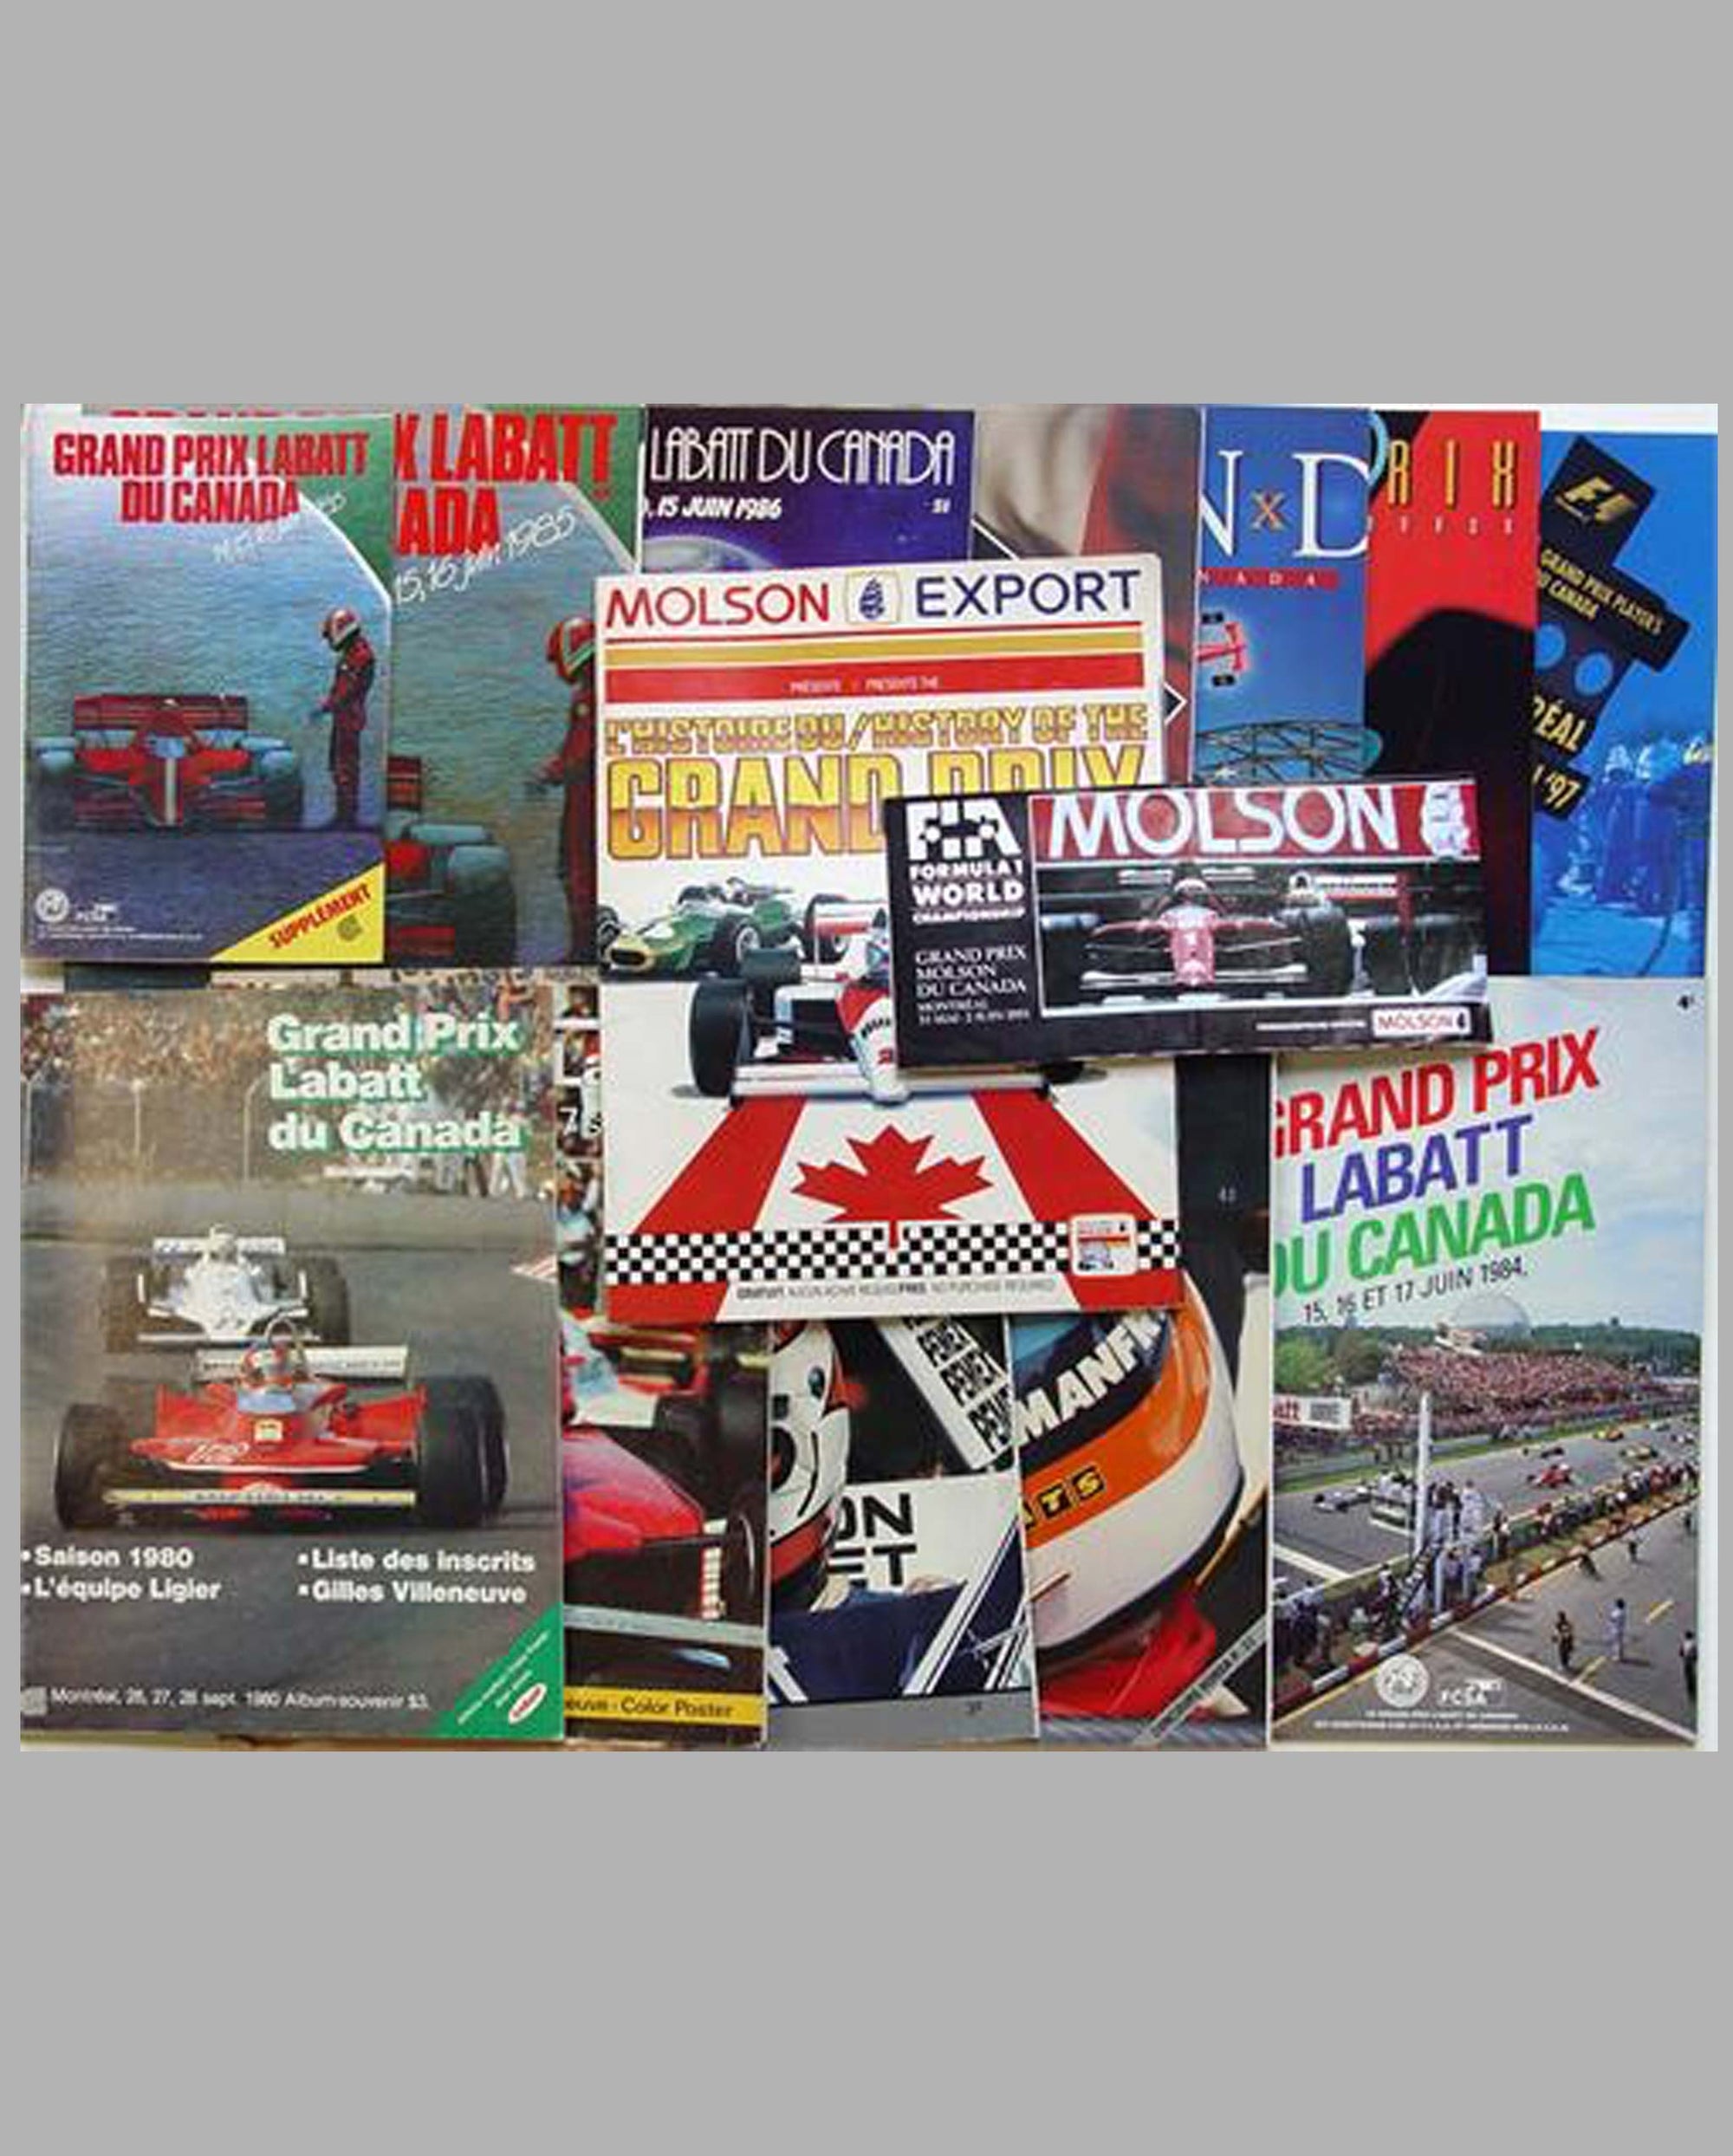 Fourteen Canadian GP official event programs and related publications